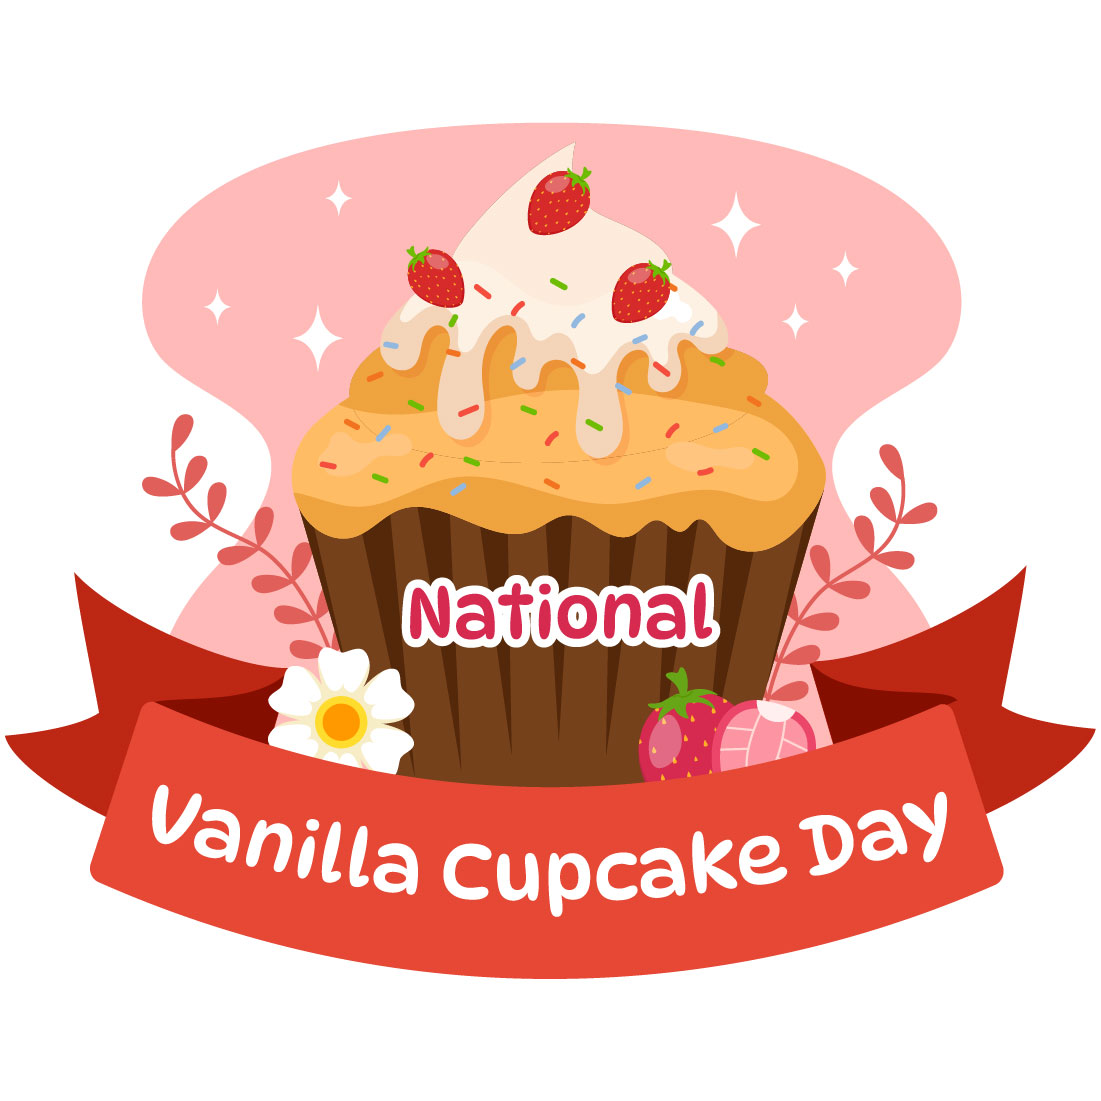 10 National Vanilla Cupcake Day Illustration preview image.